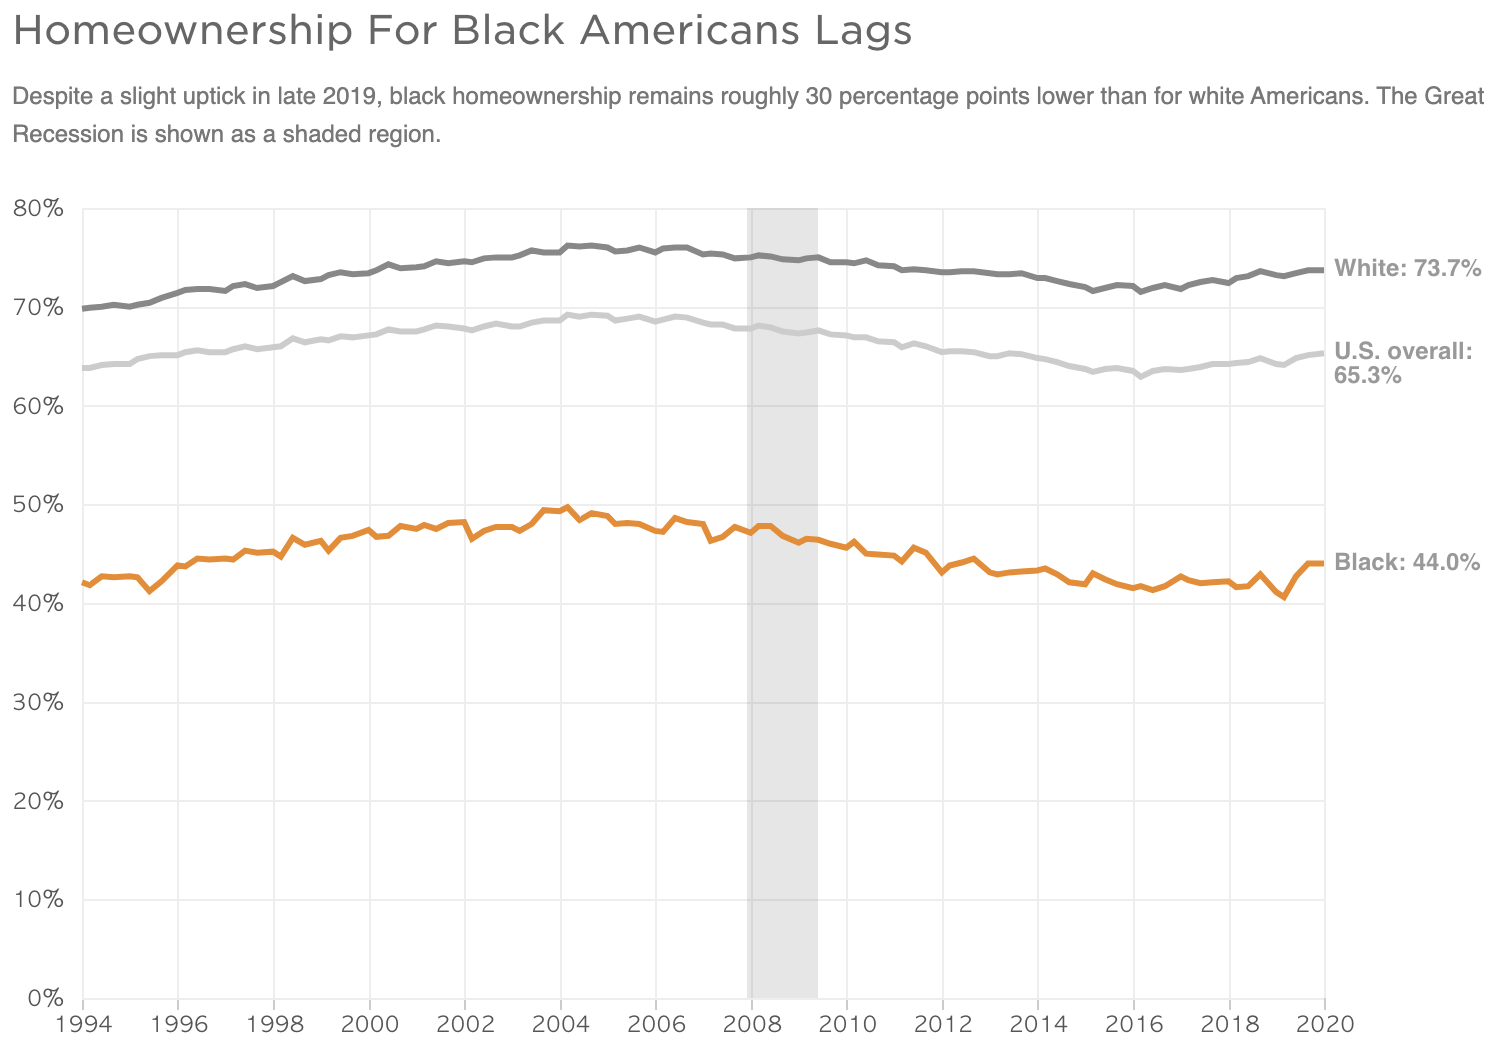 Despite a slight uptick in late 2019, black homeownership remains roughly 30 percentage points lower than for white Americans. The Great Recession is shown as a shaded region.